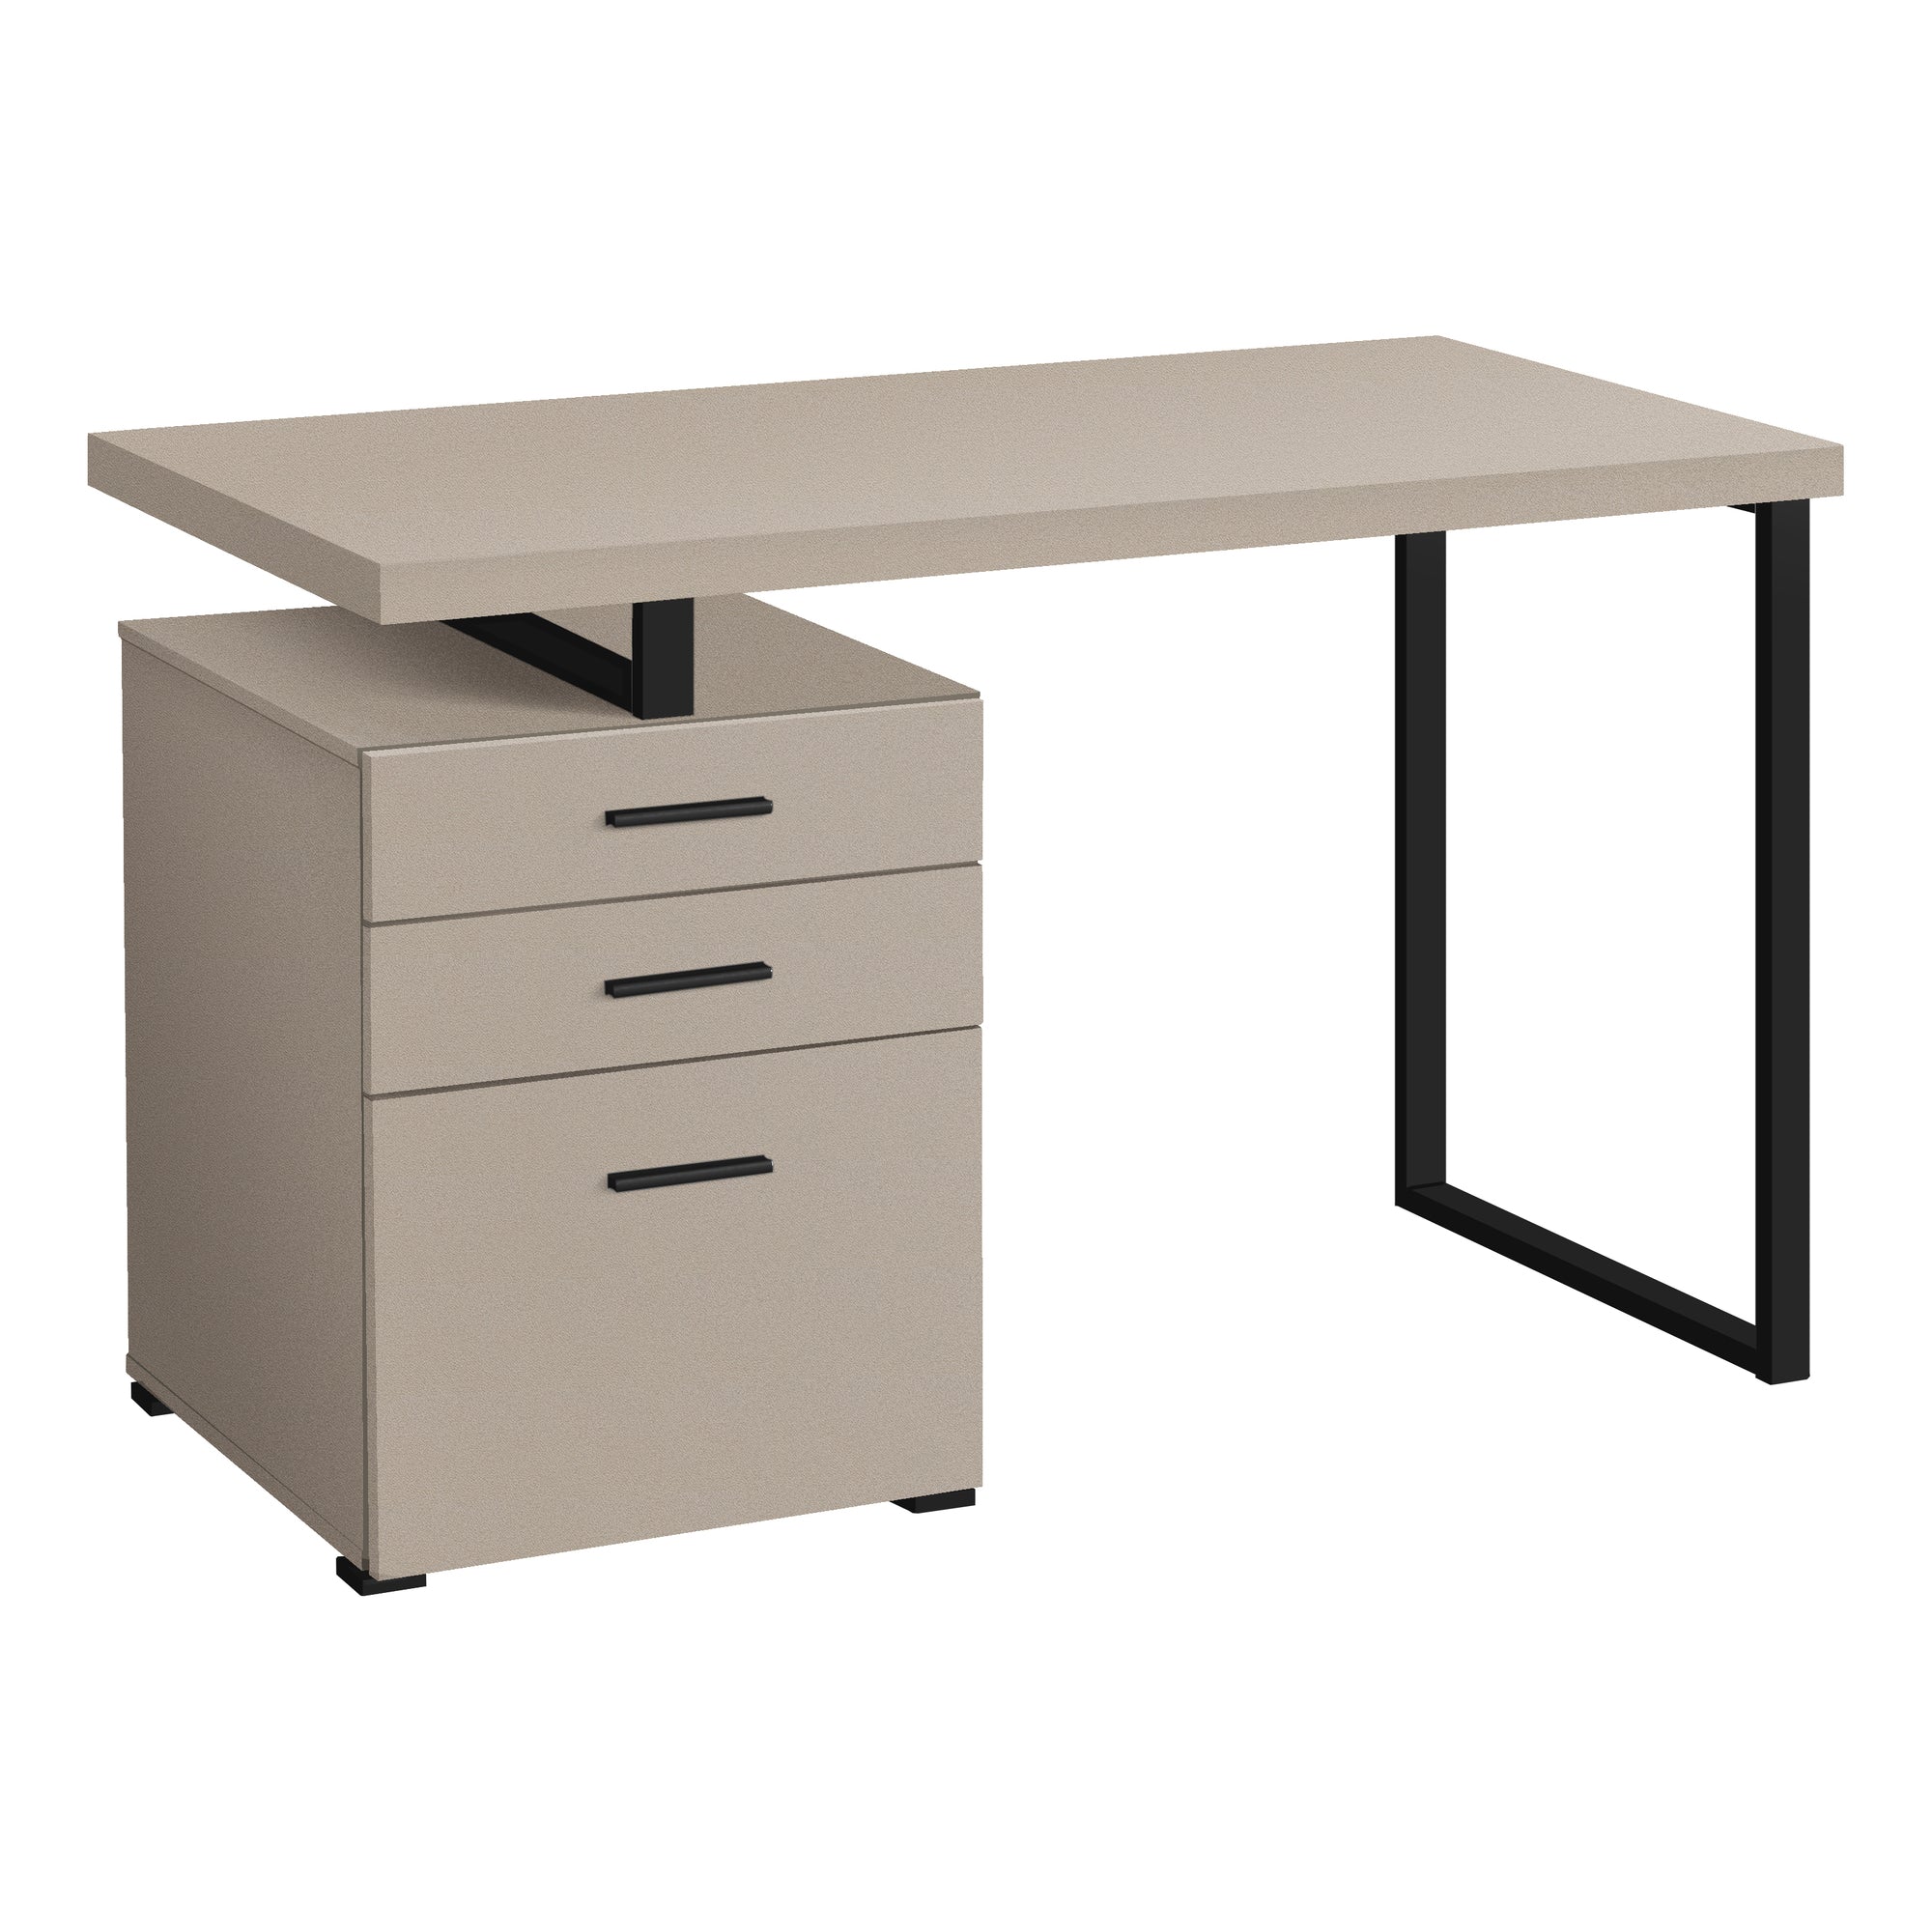 MN-507644    Computer Desk, Home Office, Laptop, Left, Right Set-Up, Storage Drawers, 48"L, Metal, Laminate, Taupe, Black, Contemporary, Modern